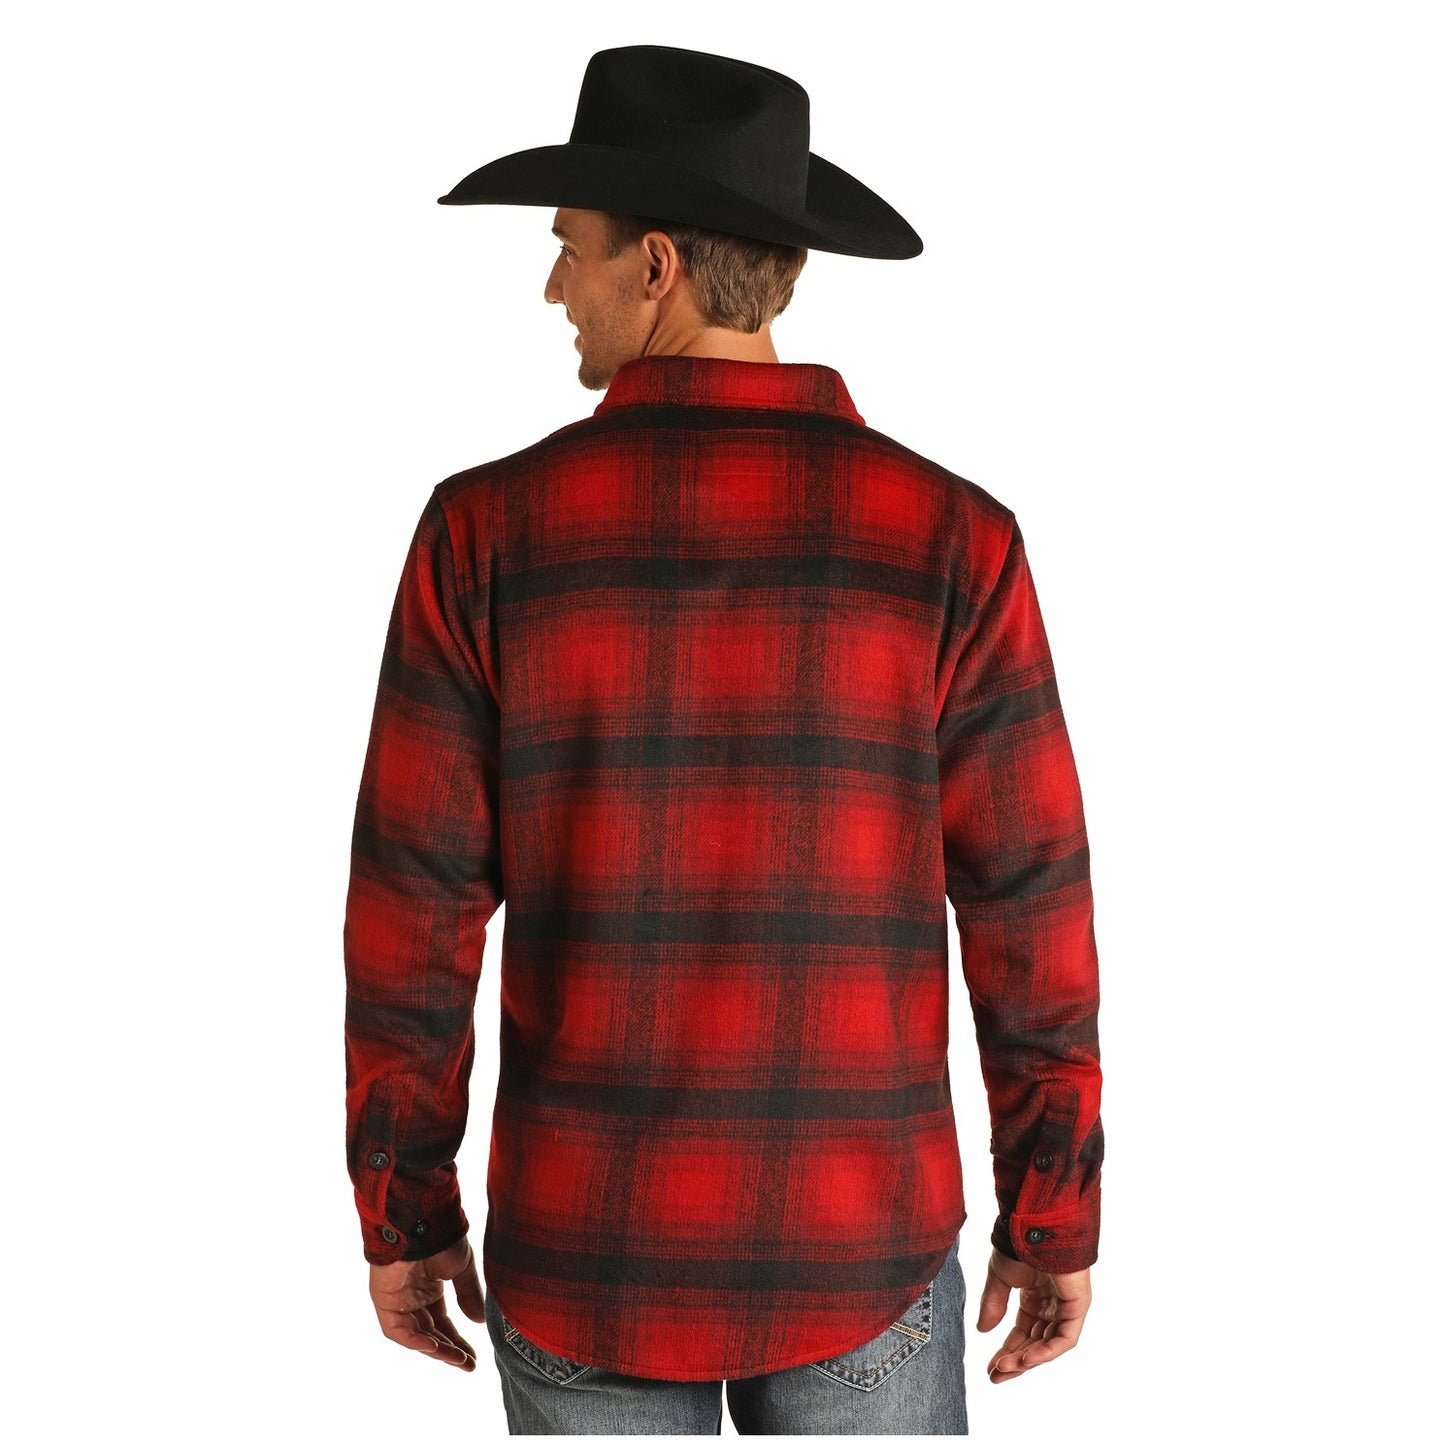 Powder River Outfitters Men's Red & Black Plaid Wool Shirt Jacket 92-1014-65